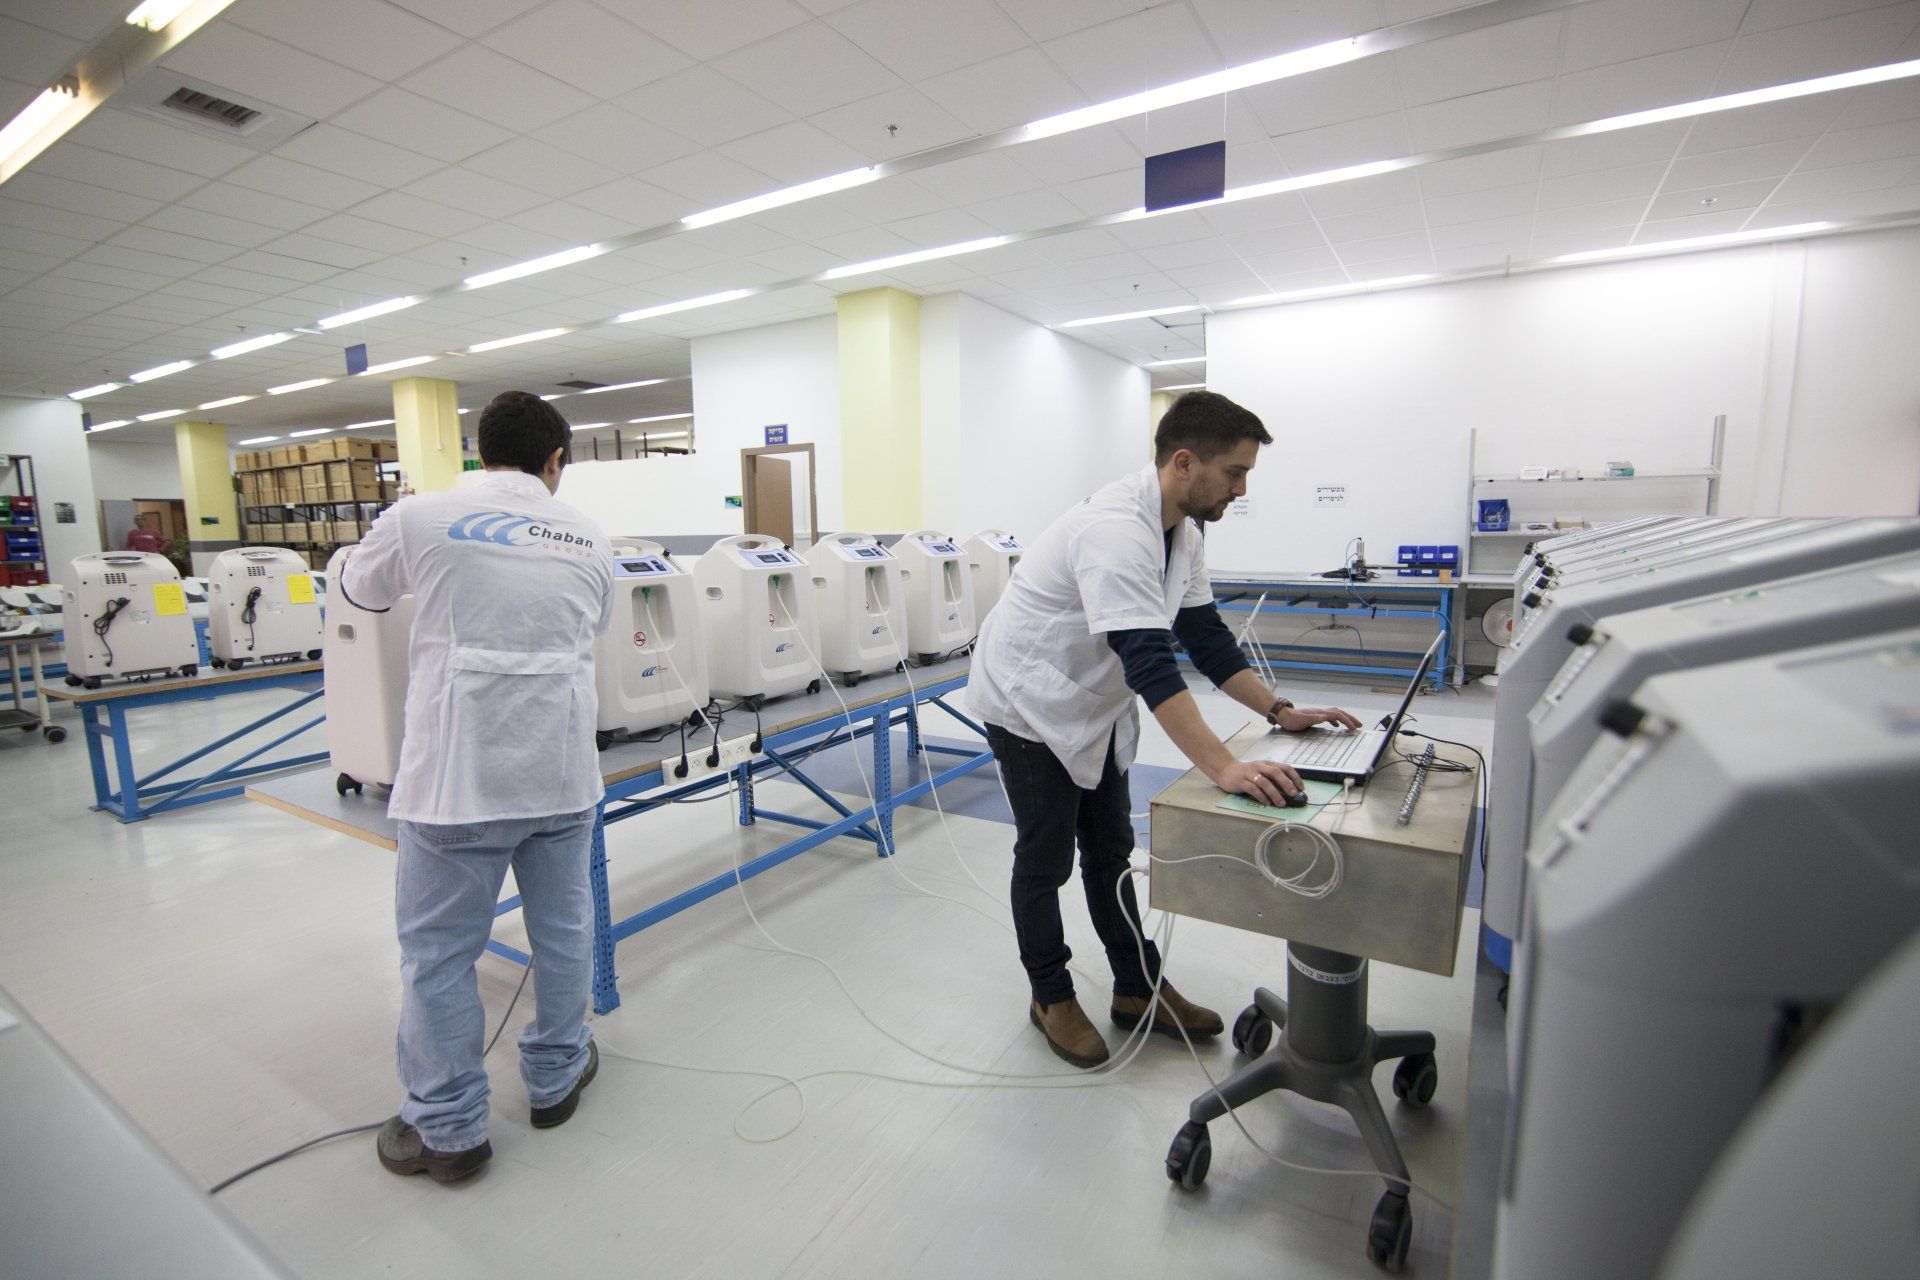 oxygen concentrator device testing lab with medical device production service company Chaban Medical